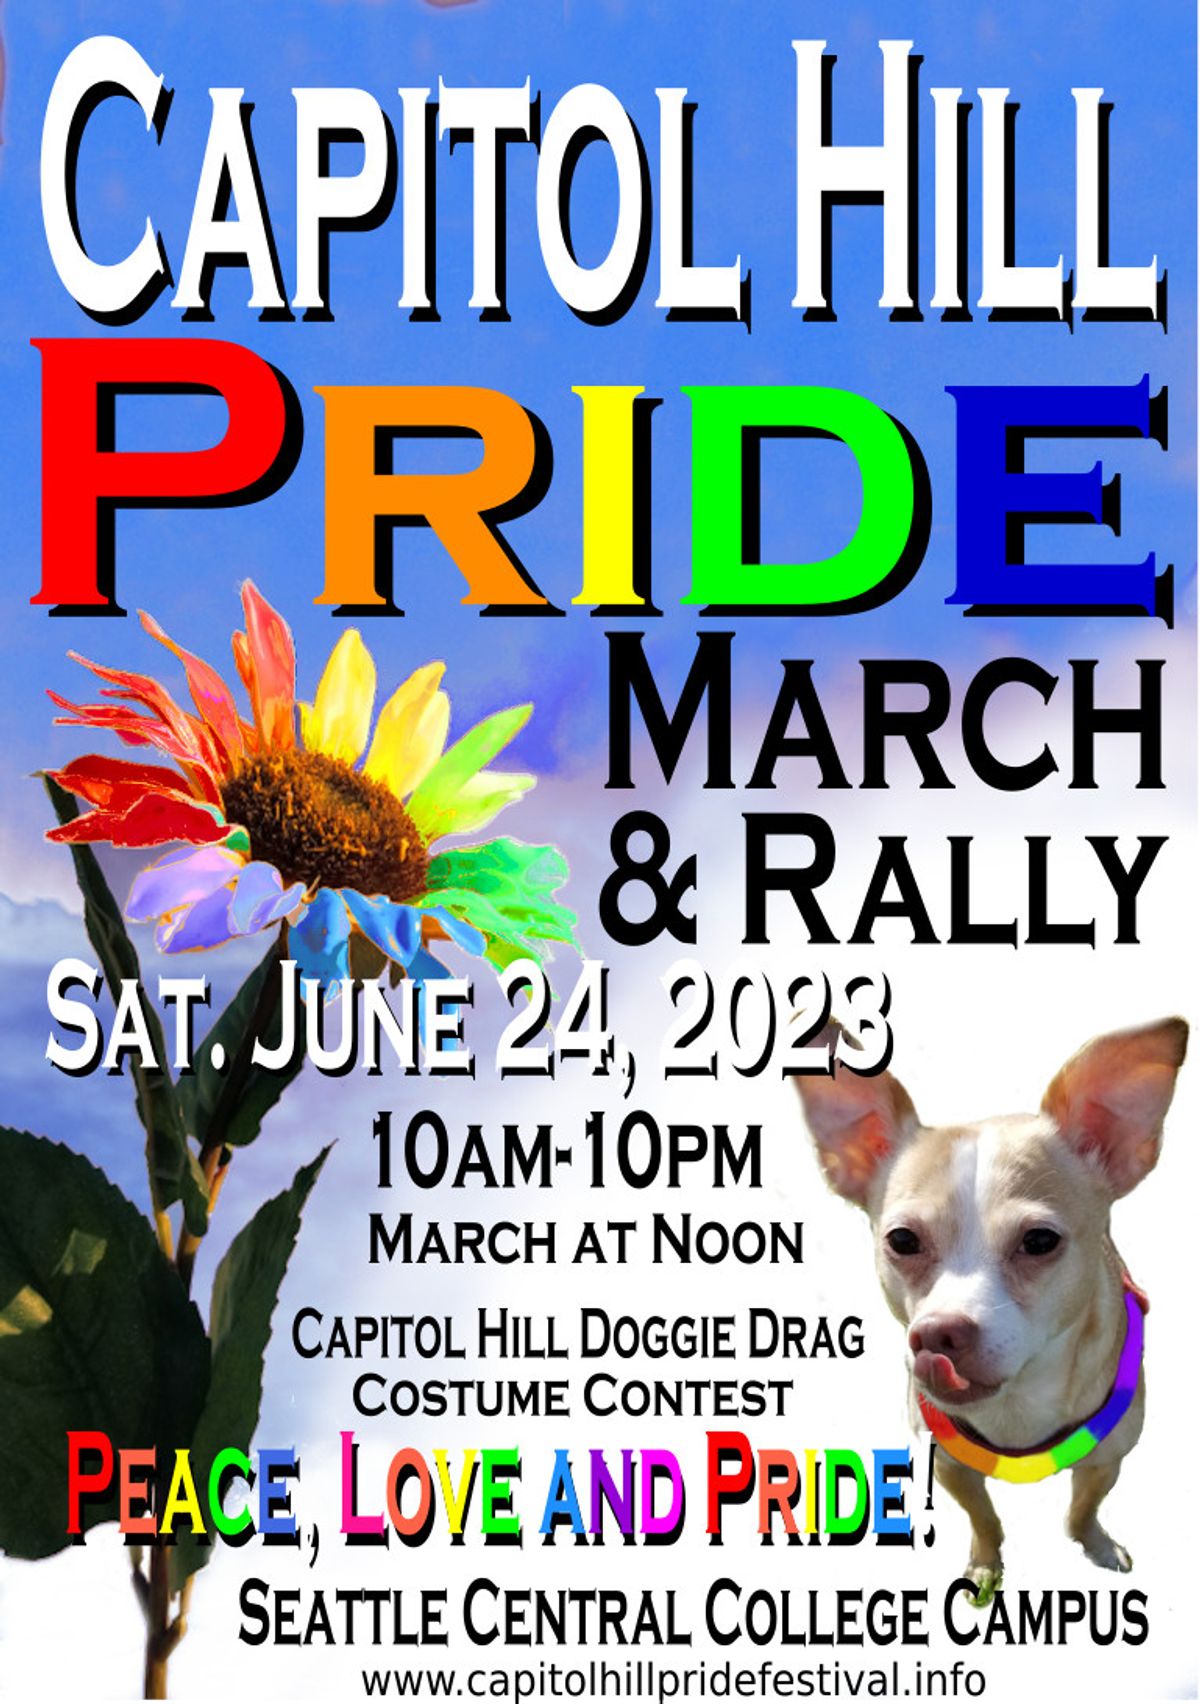 Capitol Hill Pride March & Rally 2023 at Seattle Central College in